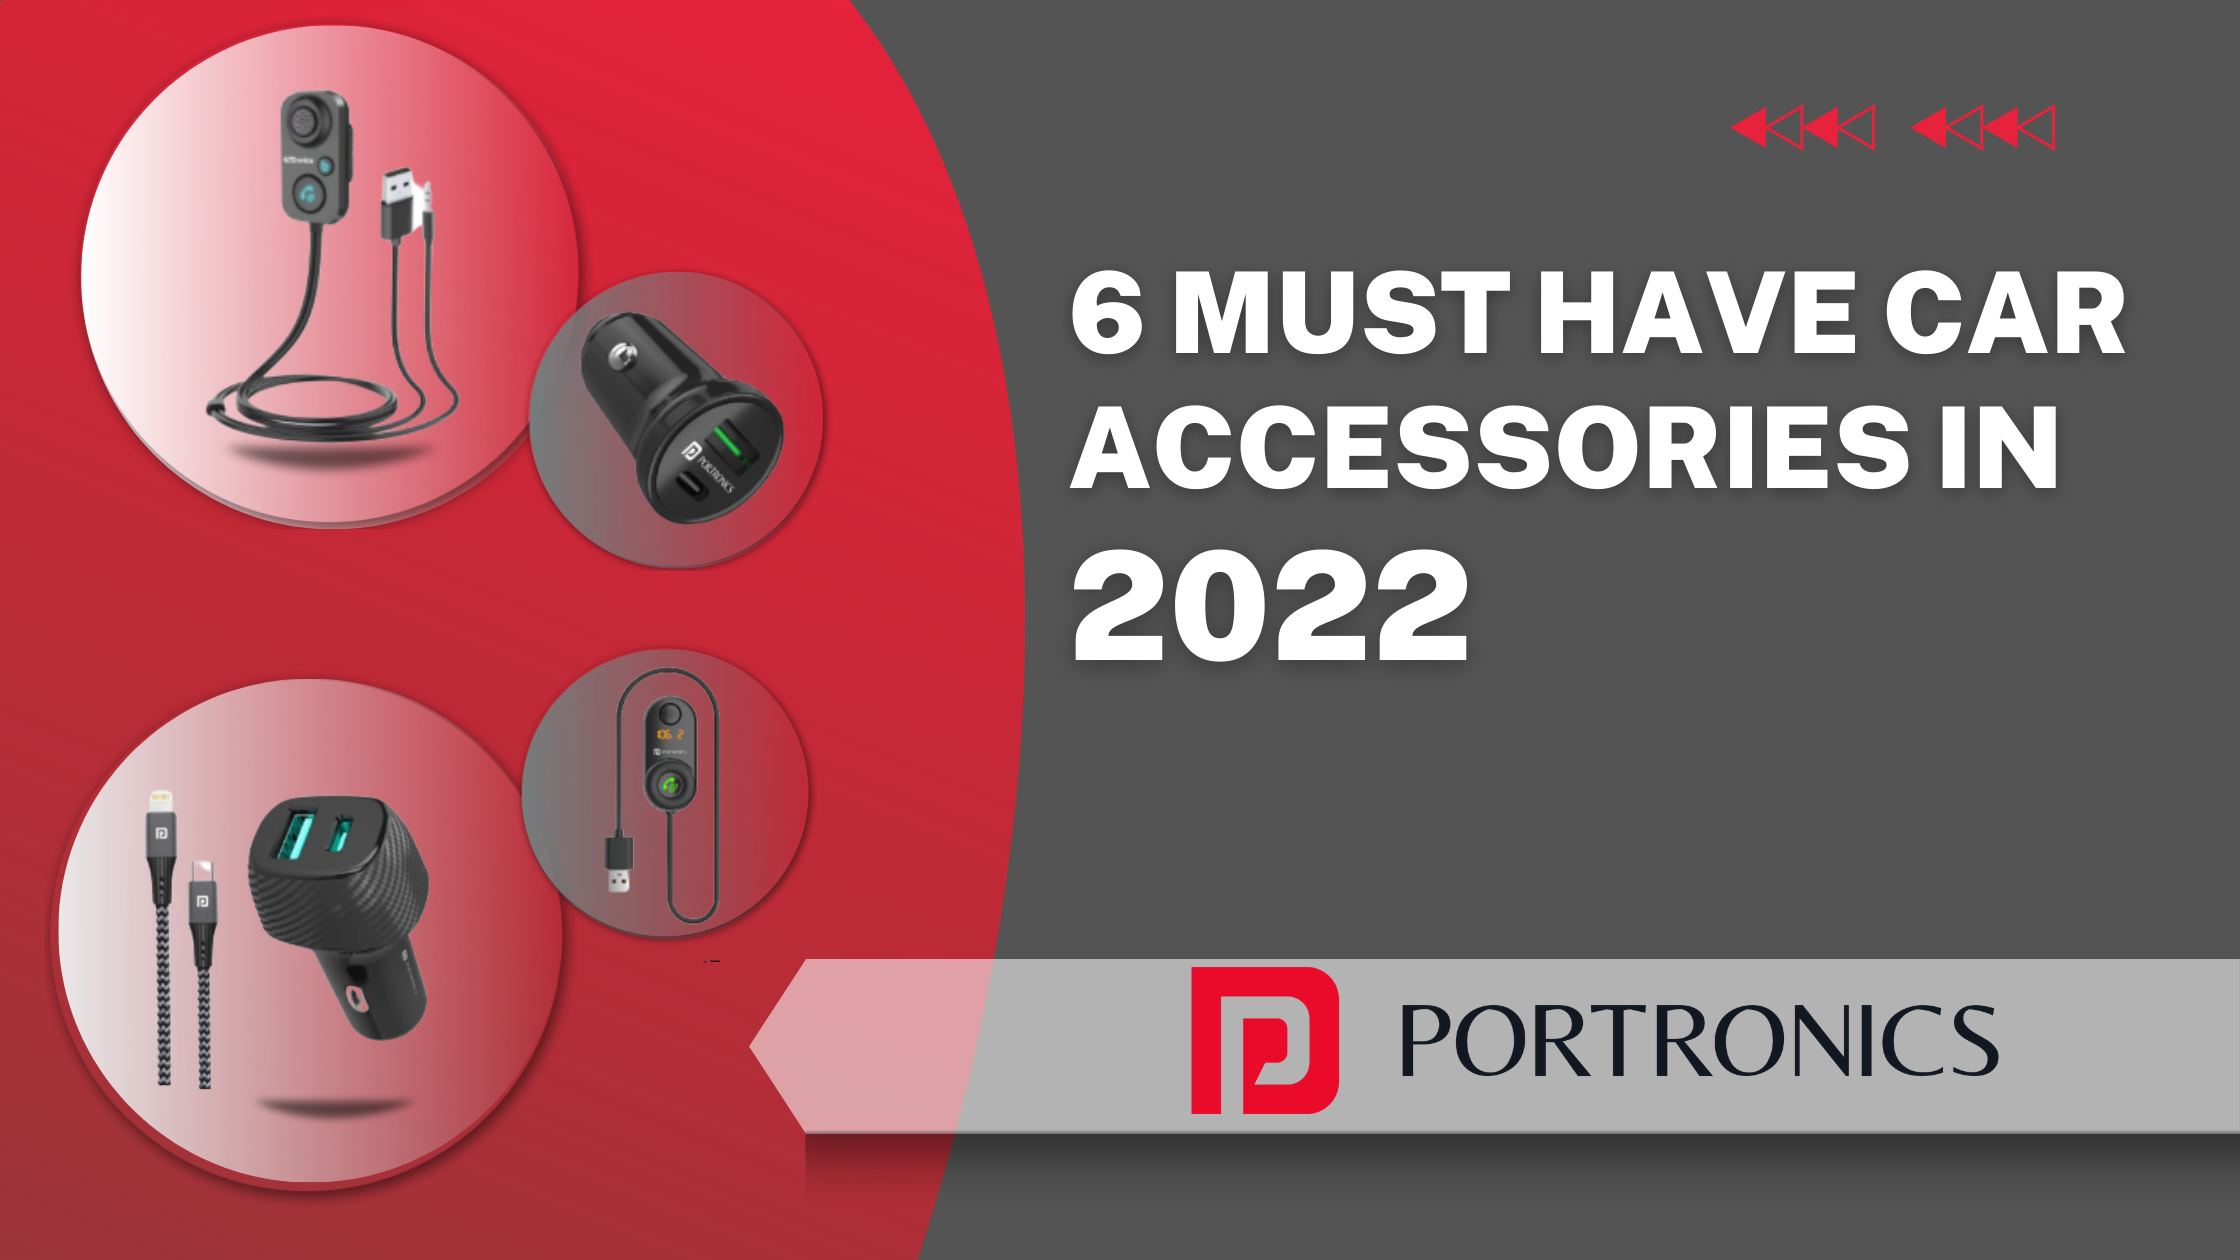 6 Must Have Car Accessories in 2022